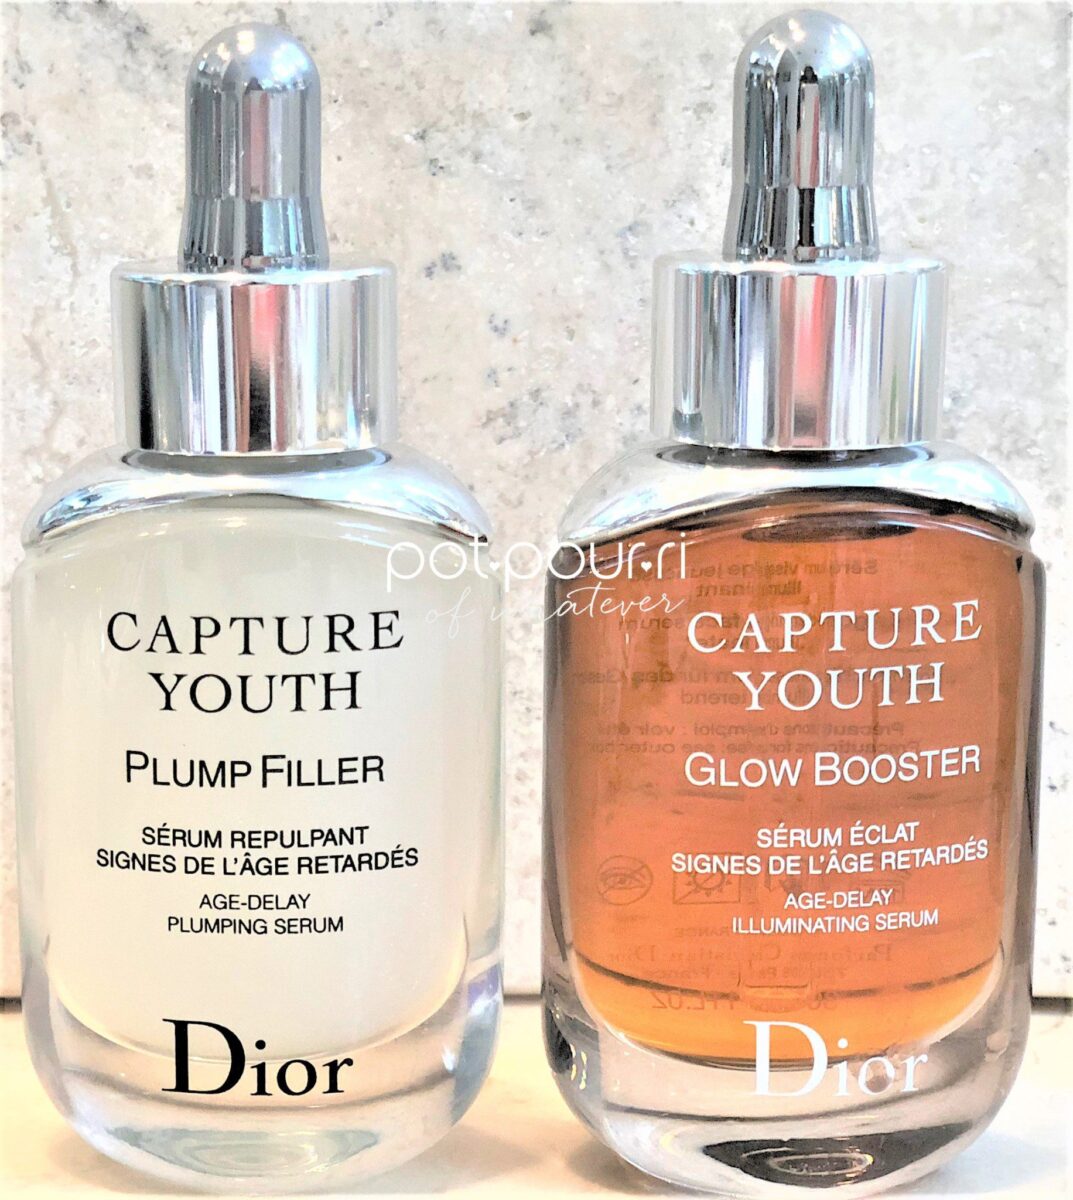 Dior Capture Youth Serums Plum Filler and Glow Booster